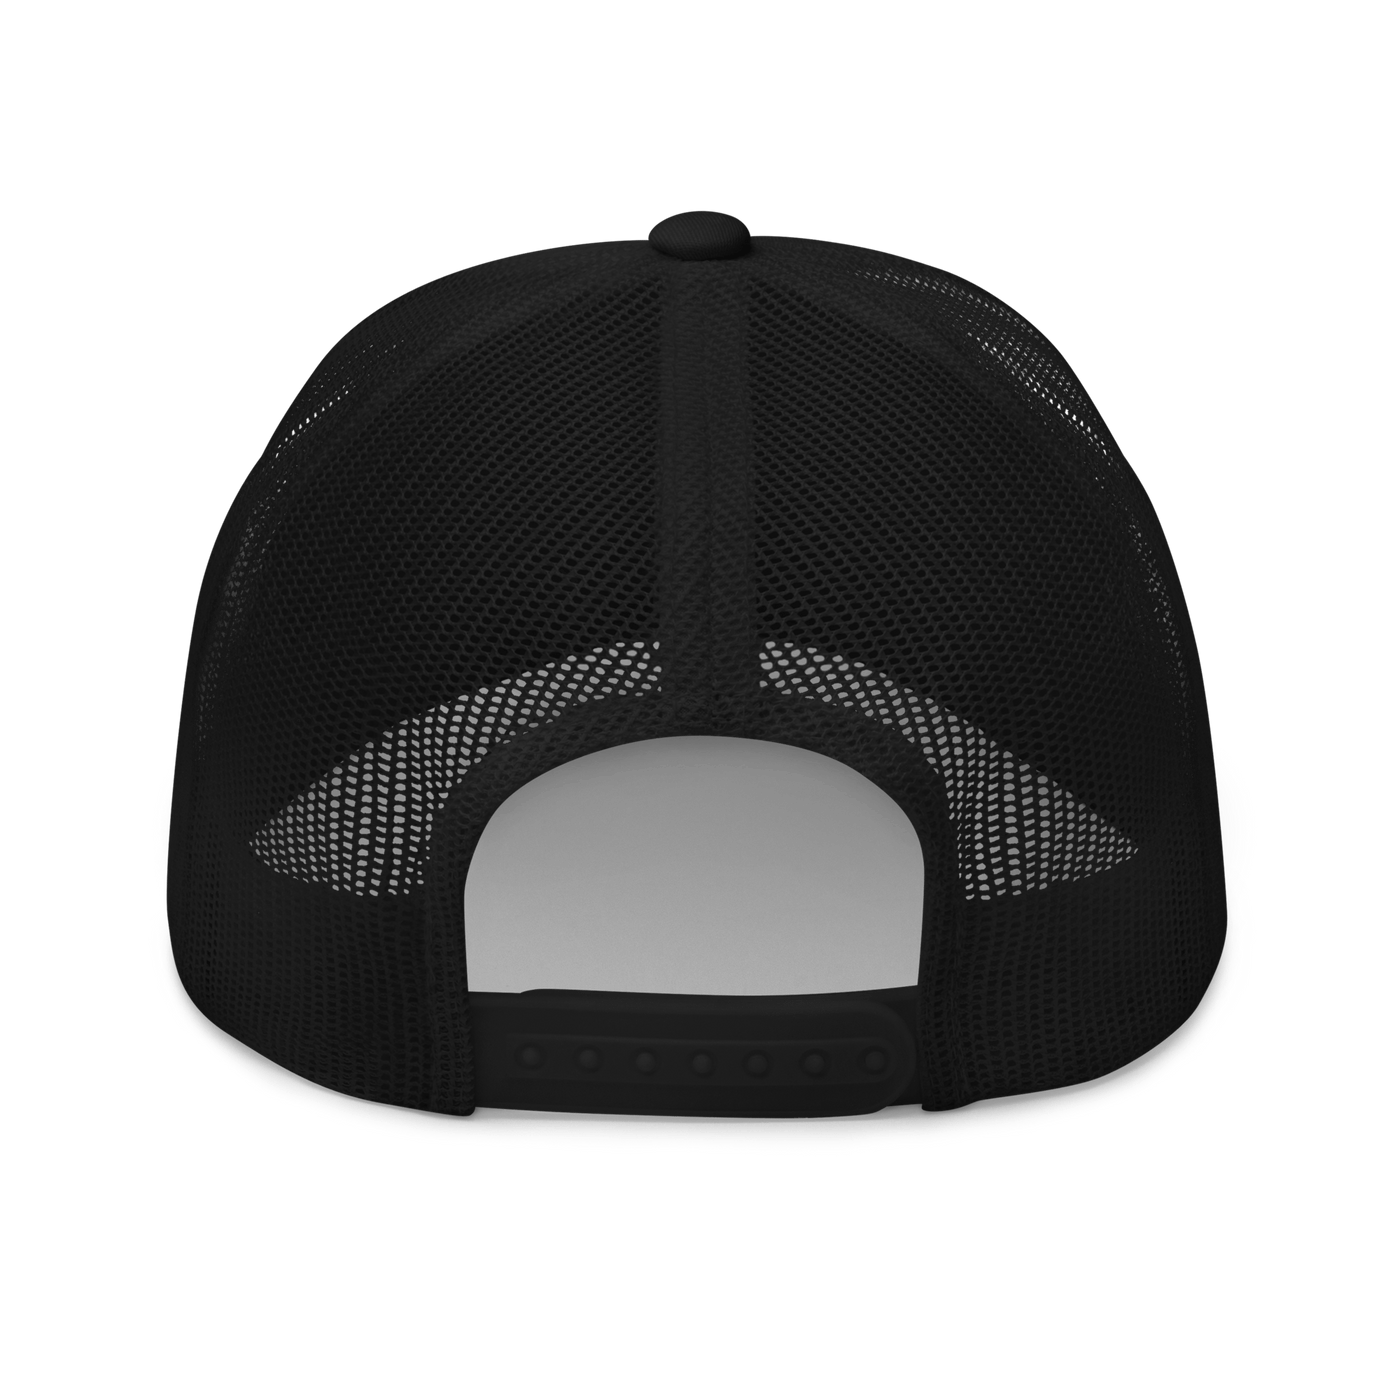 Thinking Trucker Cap - Black - - Just Another Cap Store